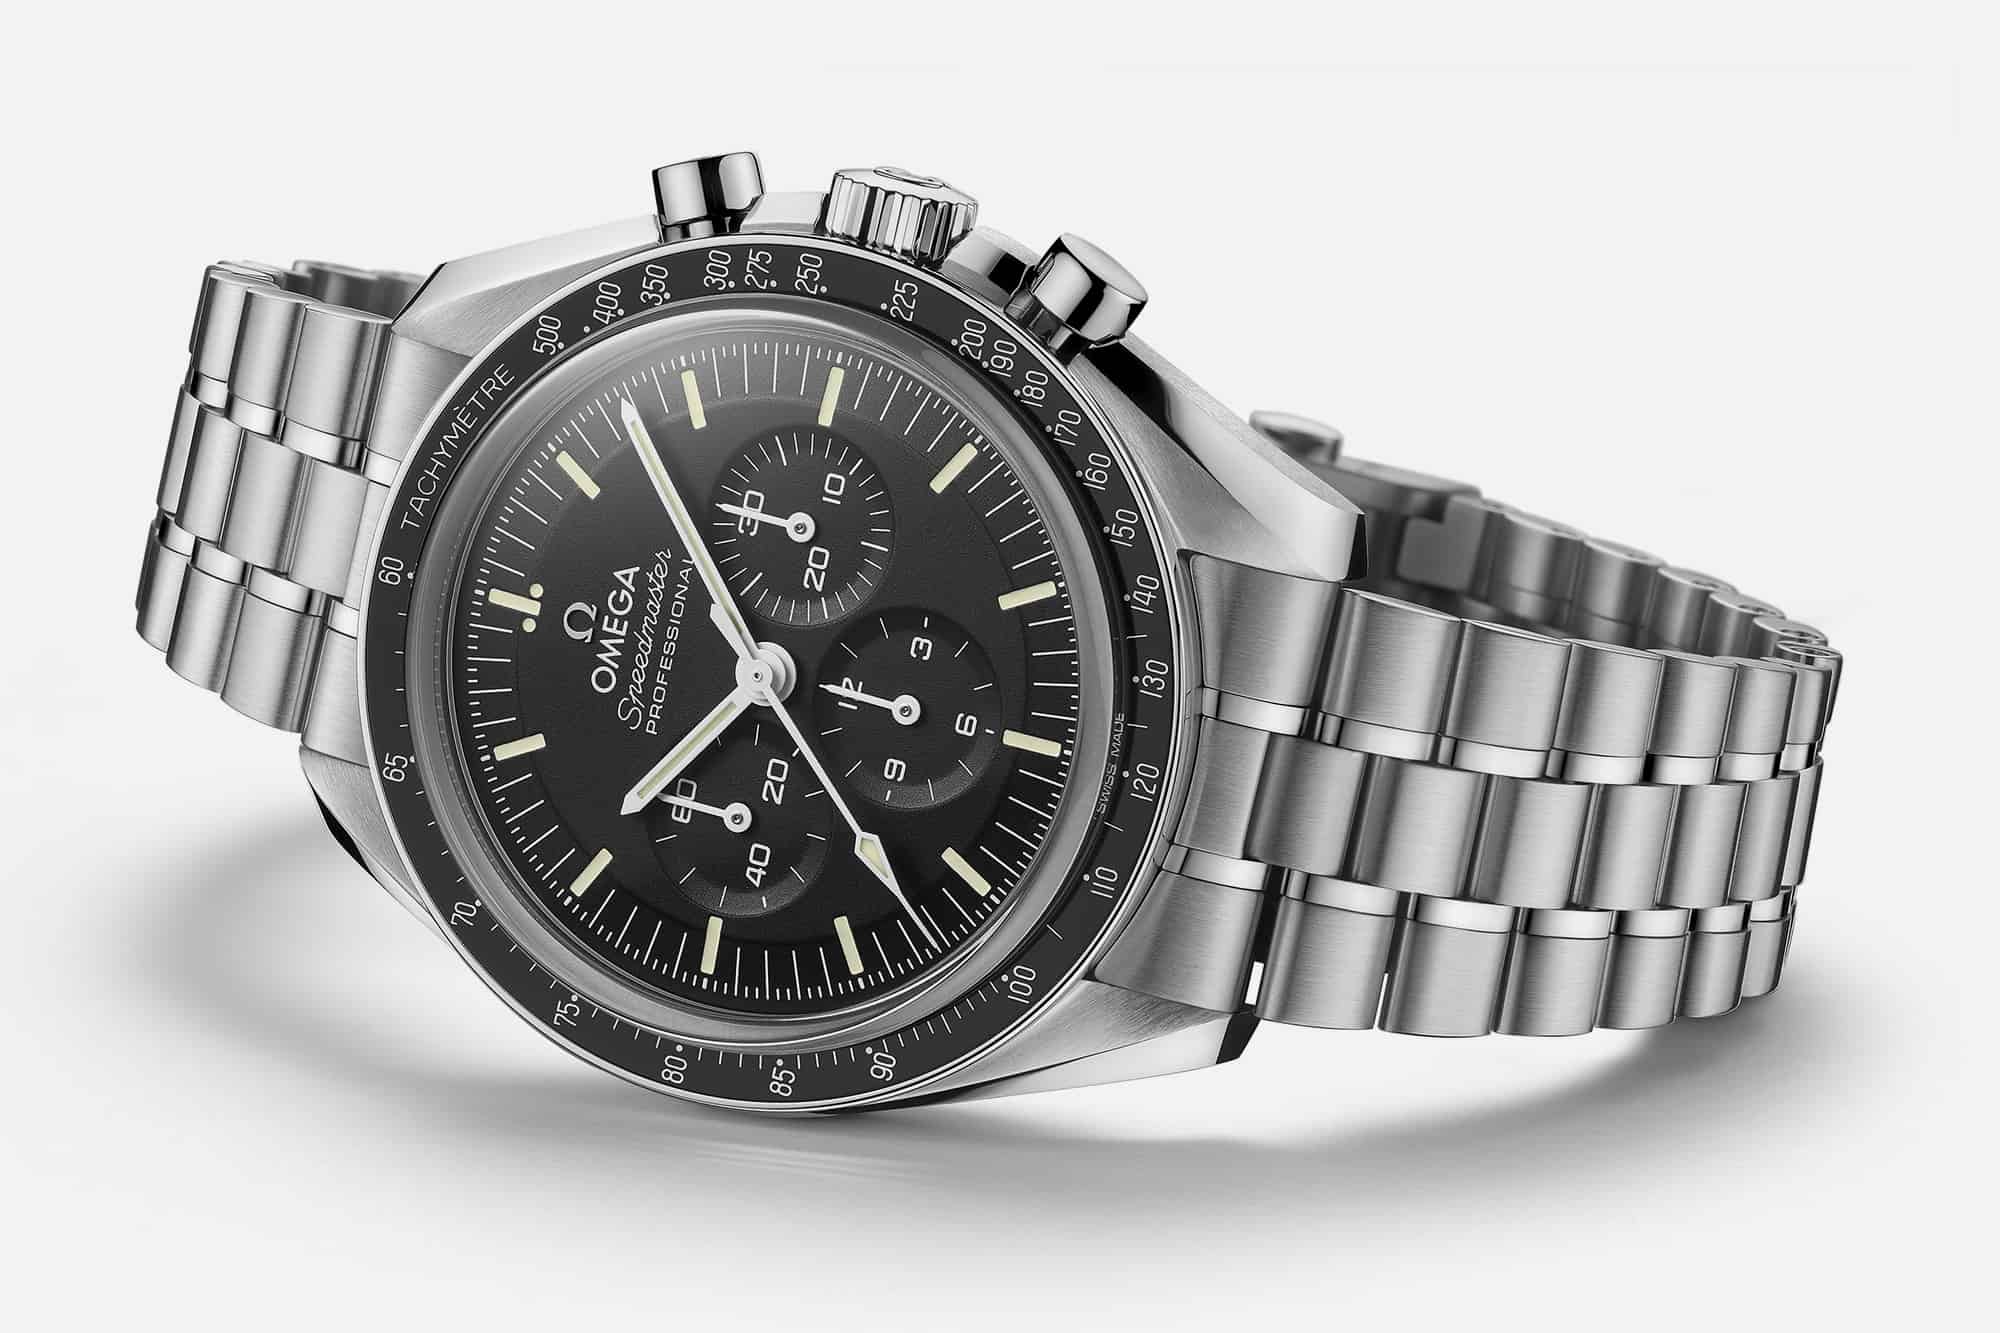 Introducing The New Omega Speedmaster with Caliber 3861